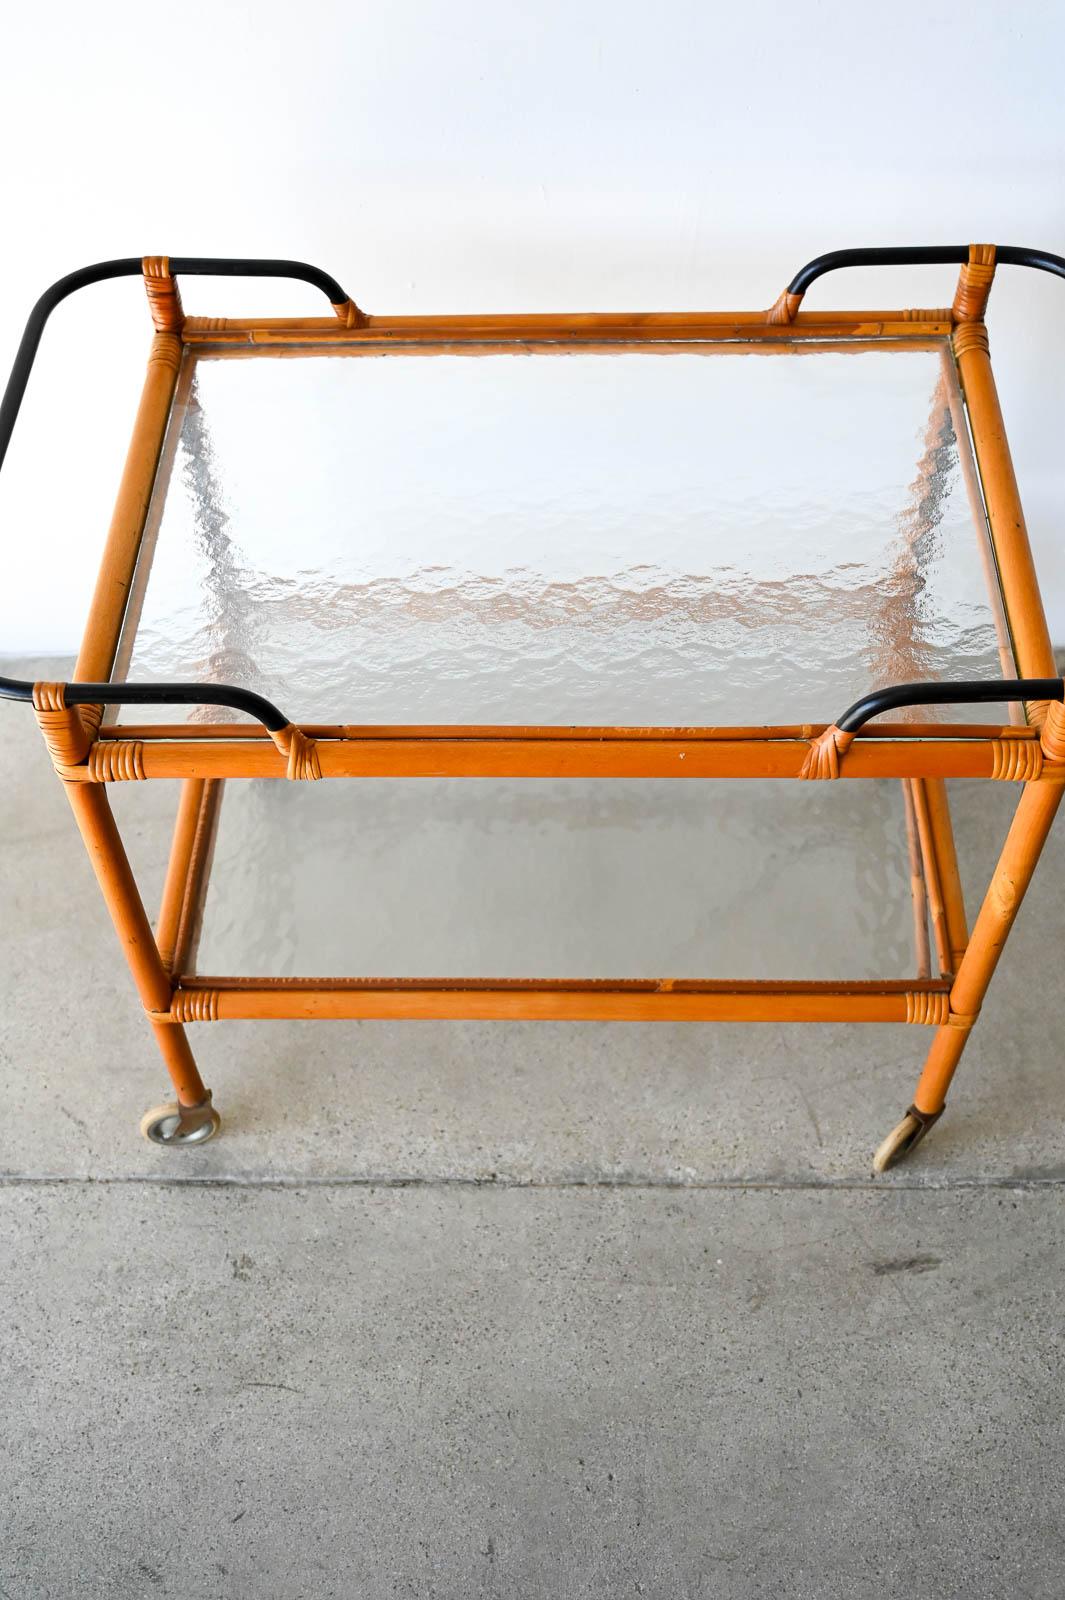 Adrian Audoux and Frida Minet Bamboo Iron and Glass Bar Trolley, ca. 1950 For Sale 1